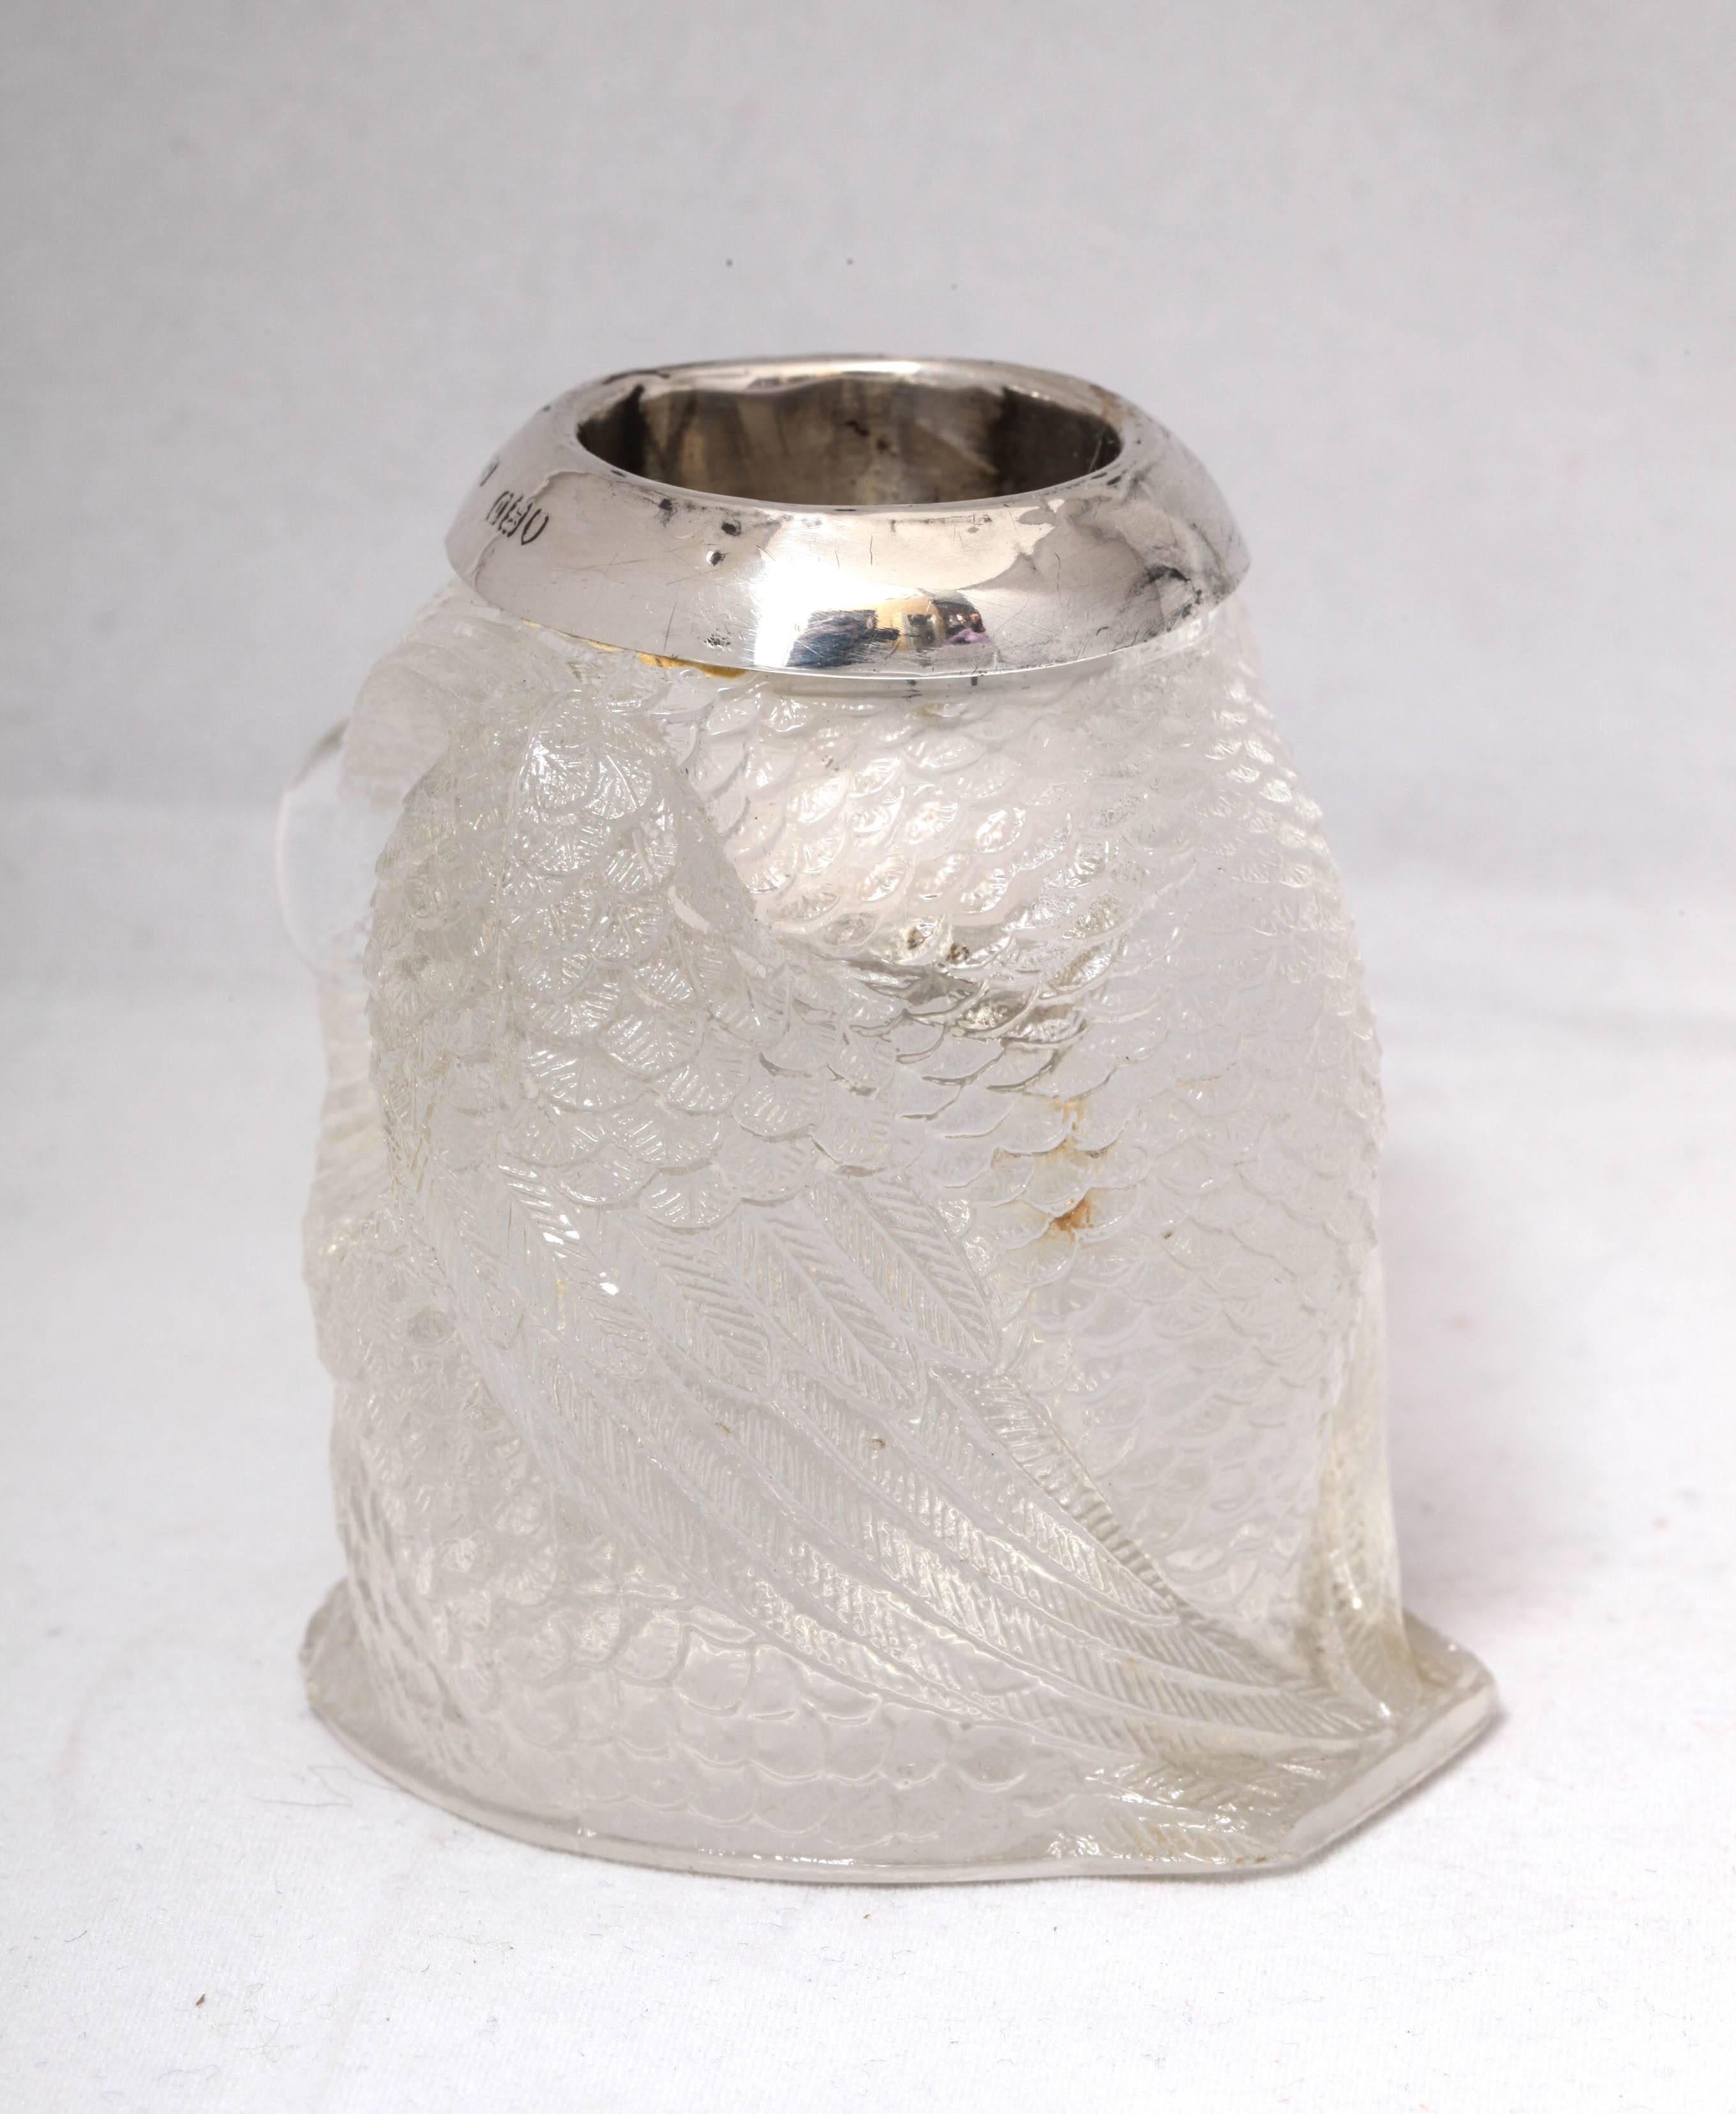 Crystal Rare and Unusual Edwardian Sterling Silver-Mounted Owl Form Match Striker